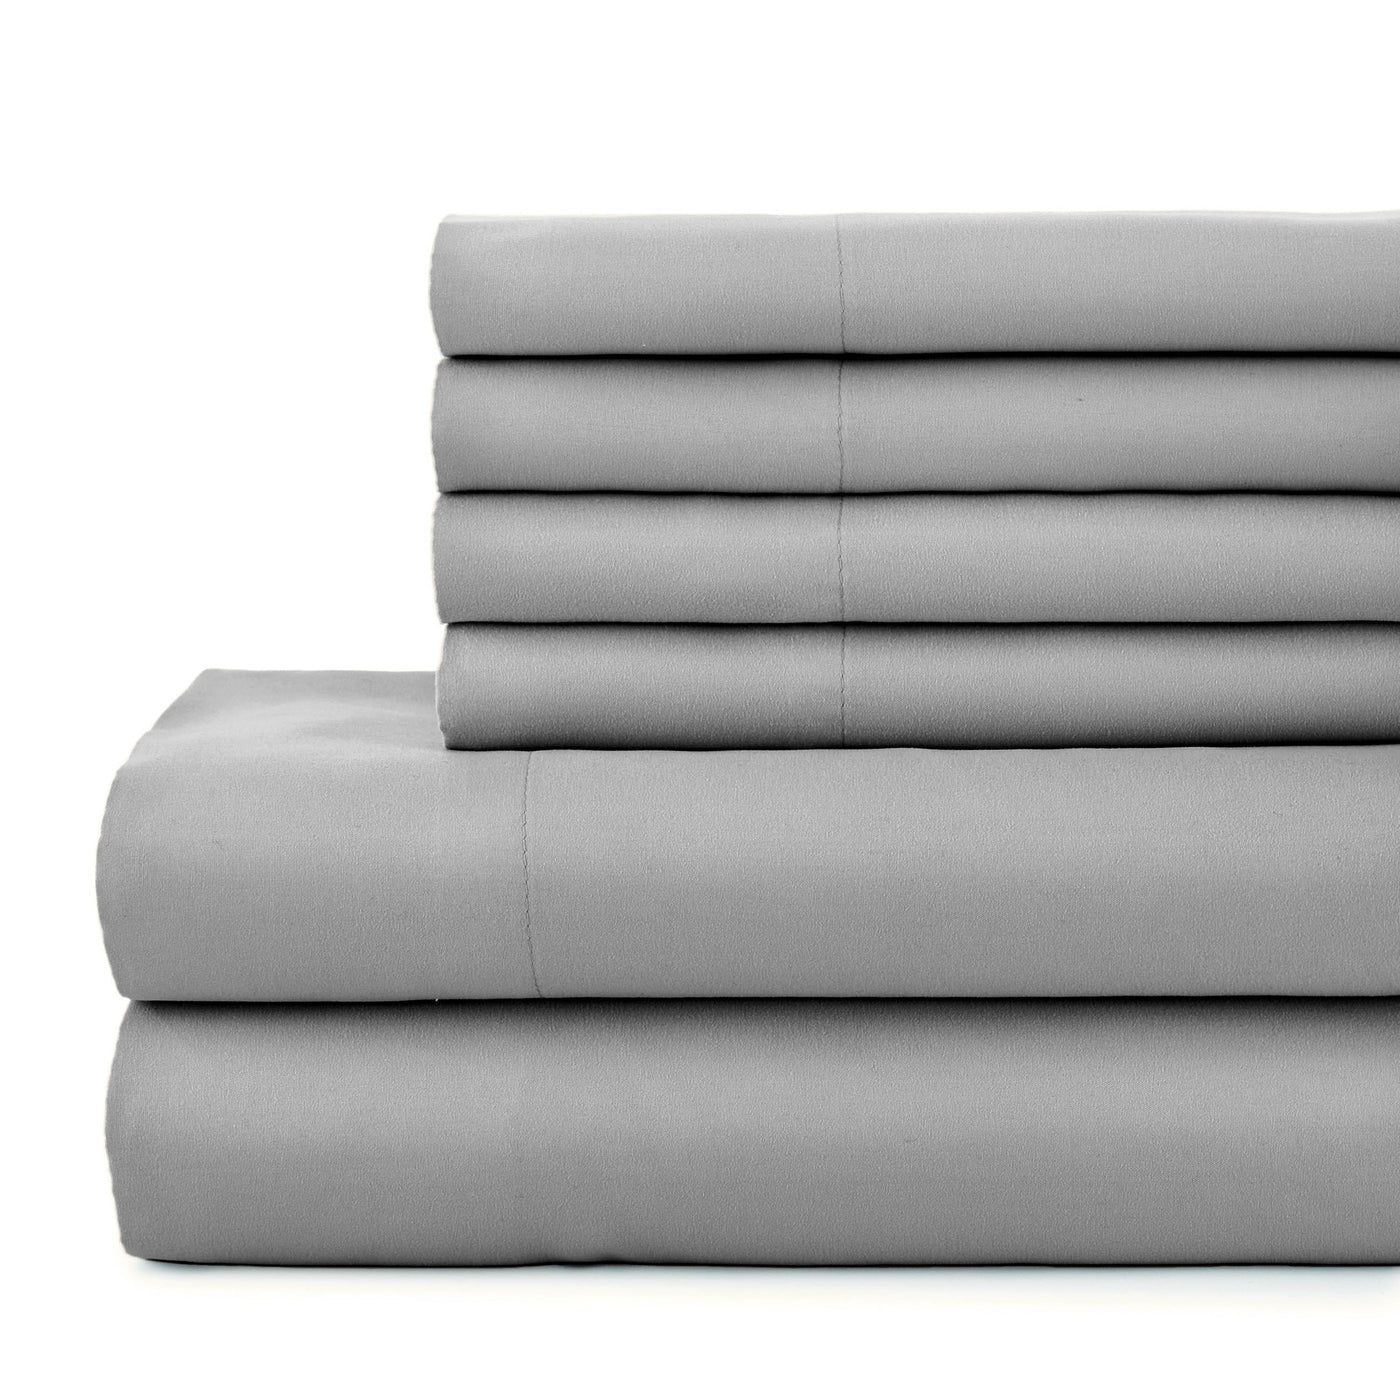 Stack Image of Everyday Essentials 6PC Sheet Set in Grey in grey#color_grey